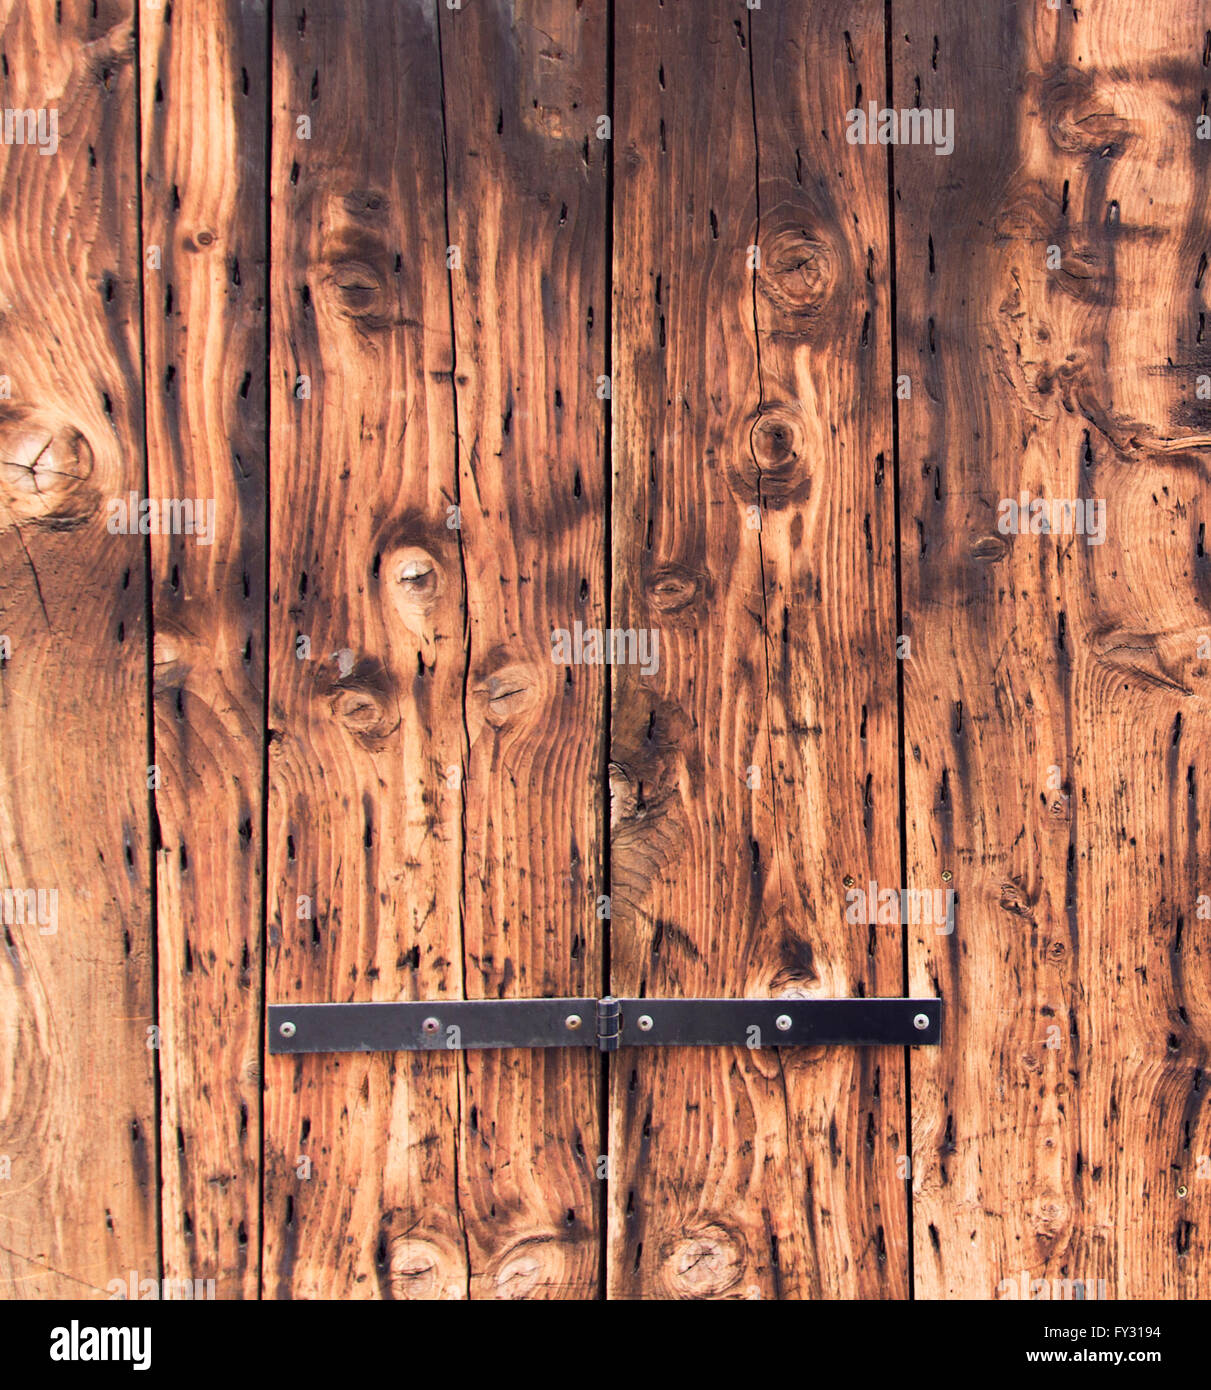 old wooden door background. closeup, natural oak tree planks surface. weathered, rustic wood material. brown color textured wall Stock Photo